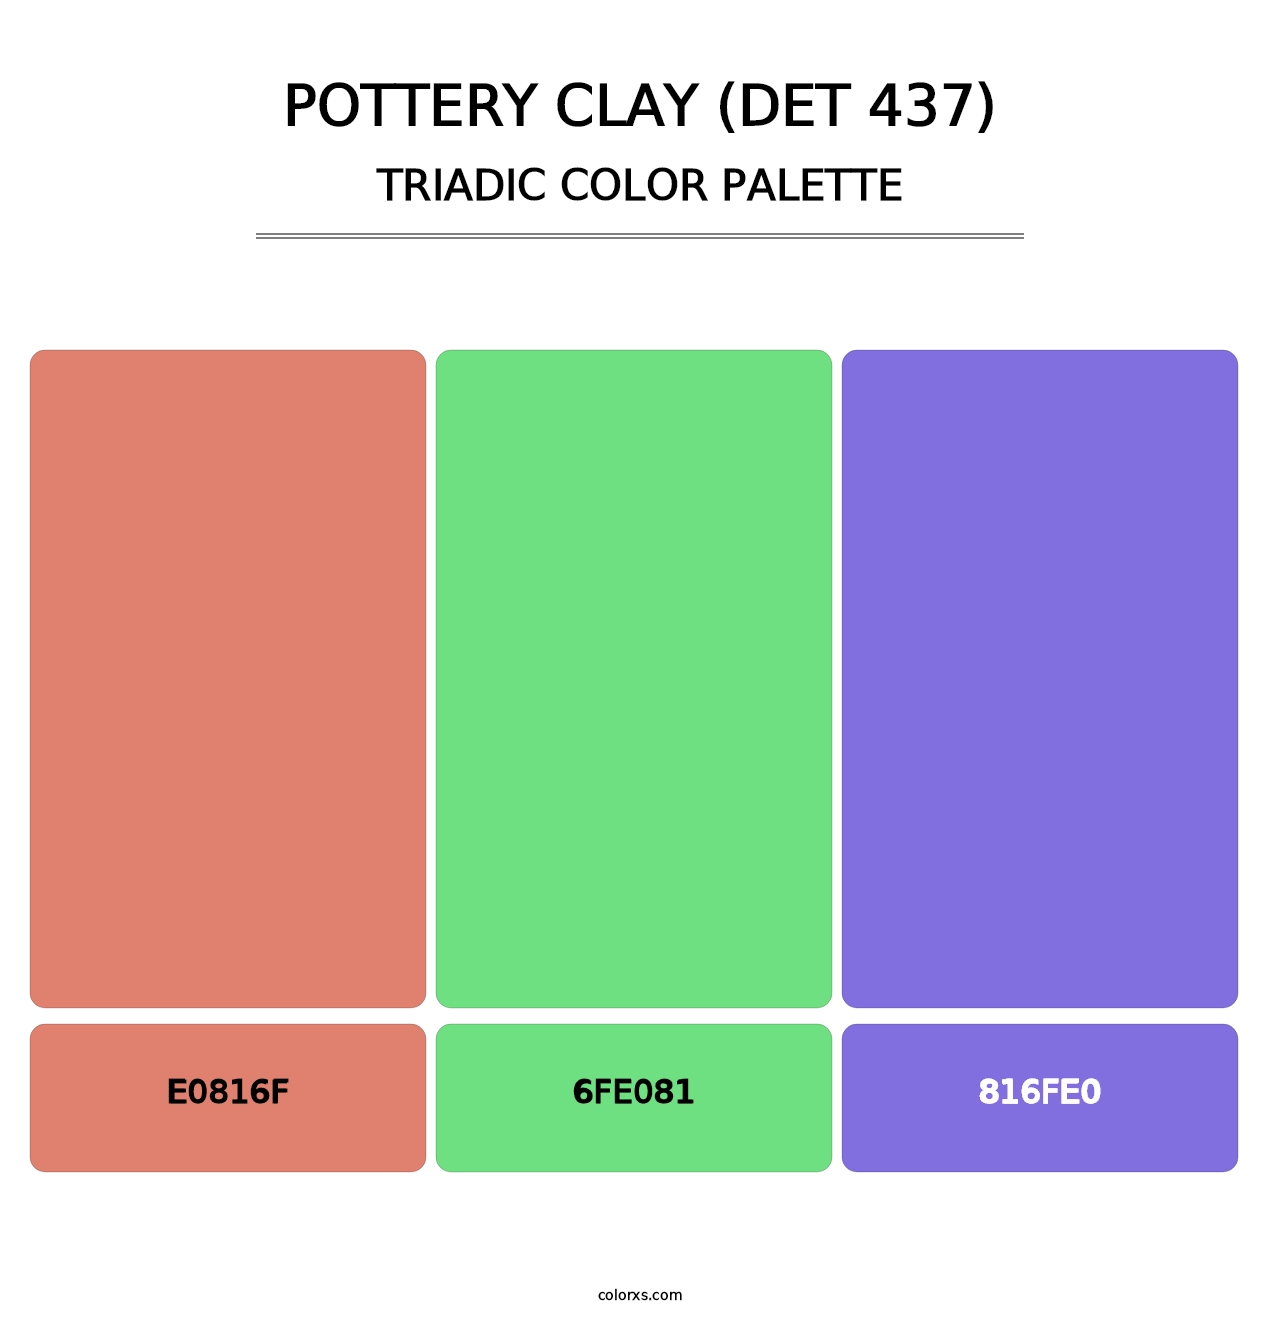 Pottery Clay (DET 437) - Triadic Color Palette